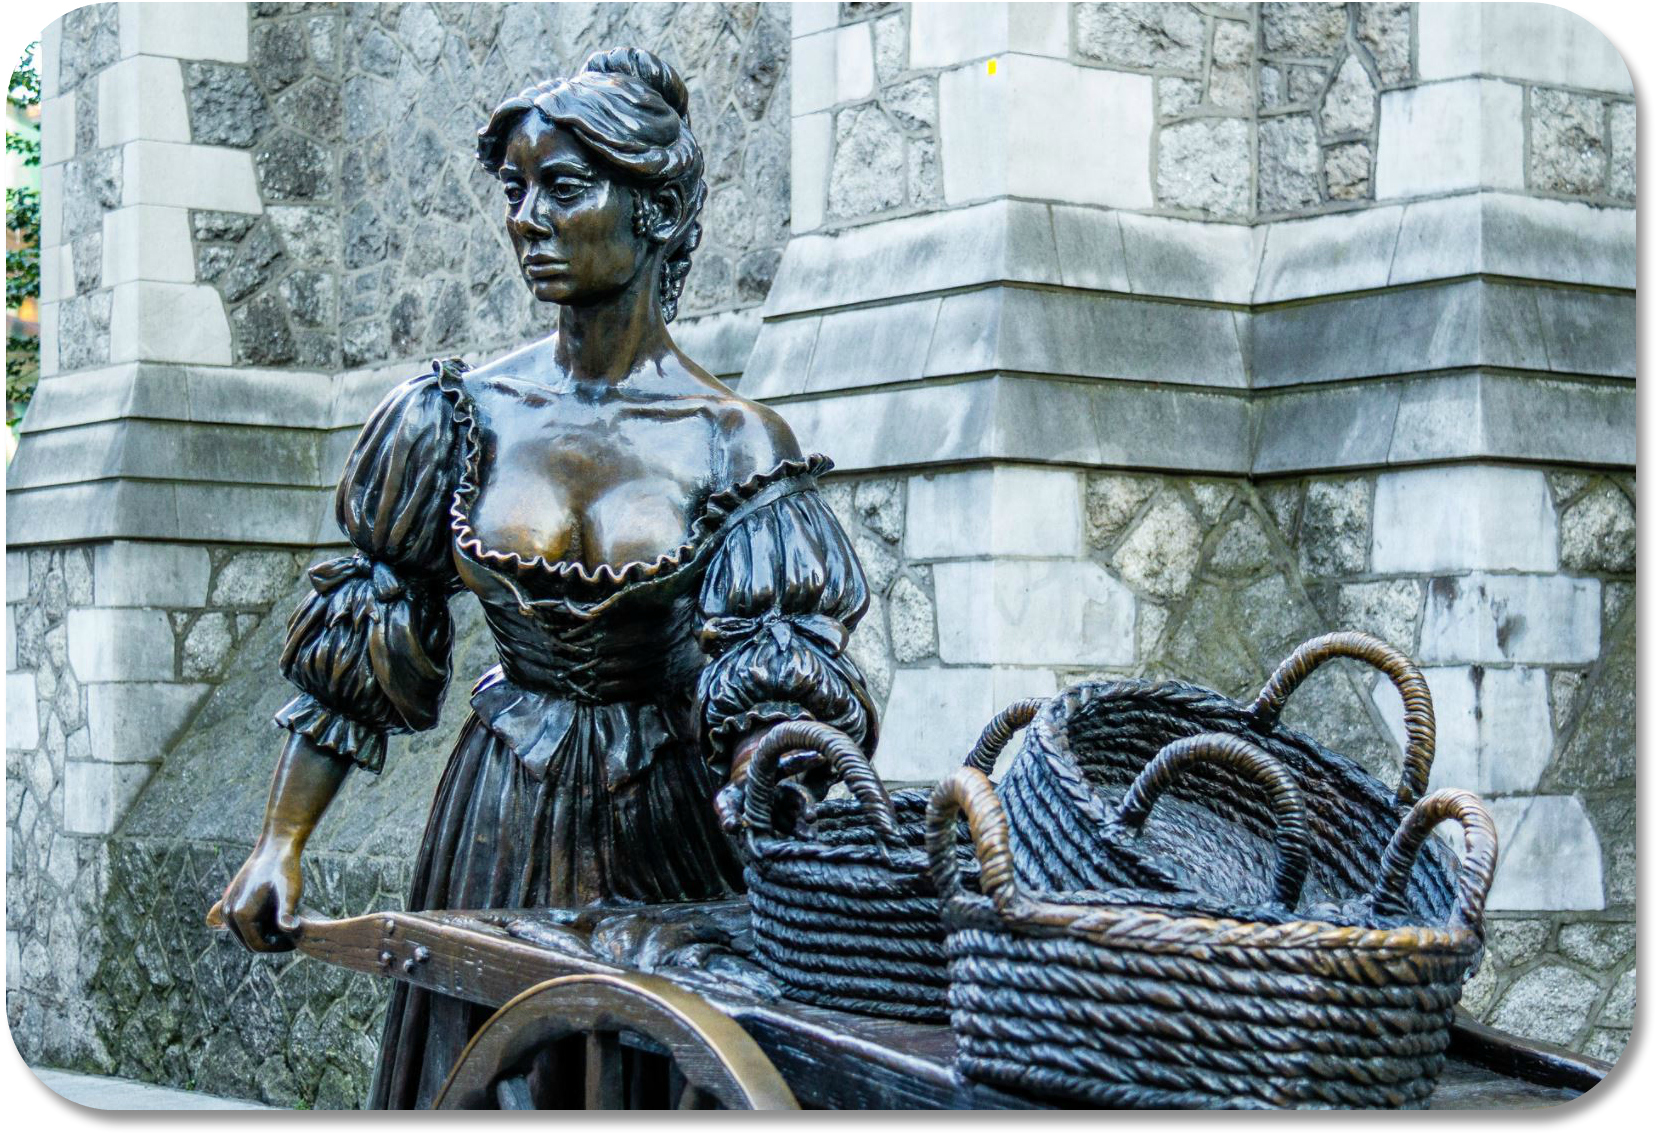 Molly Malone Statue Photocredit Marcial Bernabeau via Flickr